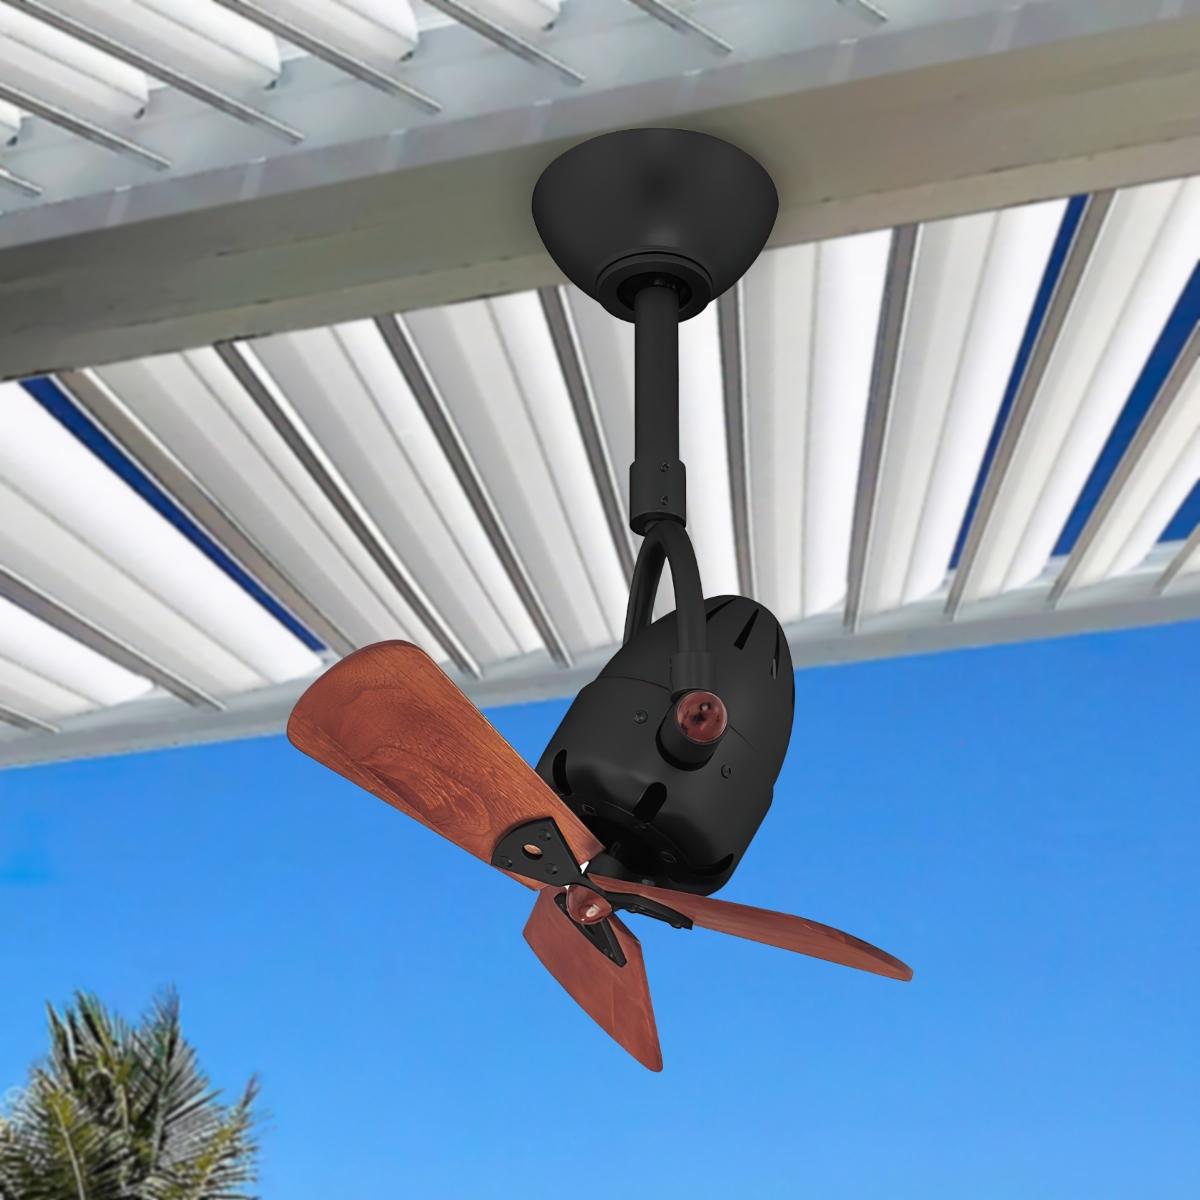 Diane 16 Inch Propeller Outdoor Ceiling Fan With Remote